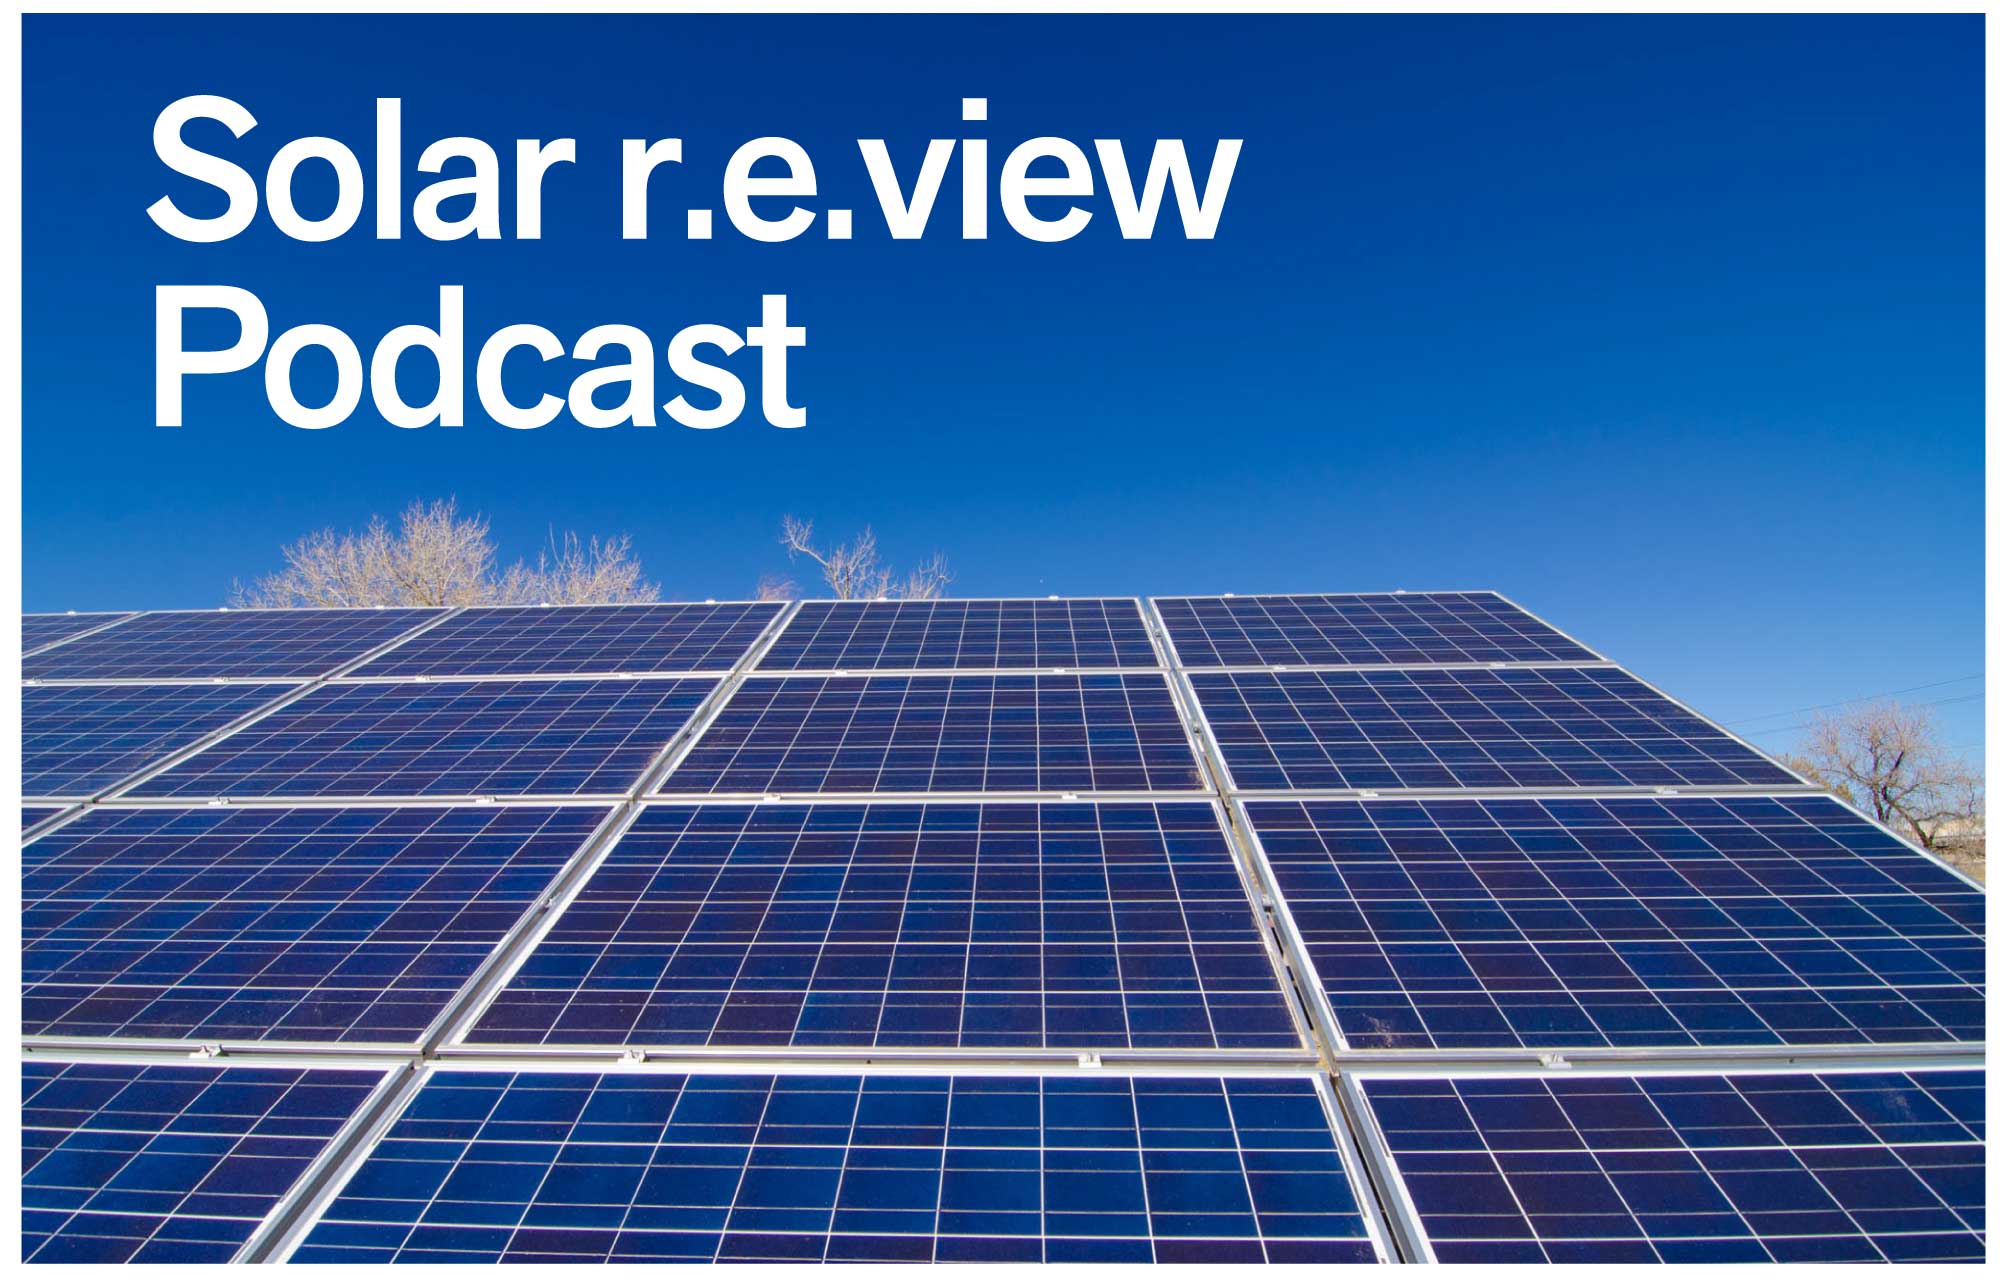 Podcast – 6 Key Trends for Residential Solar Lead Generation in 2019